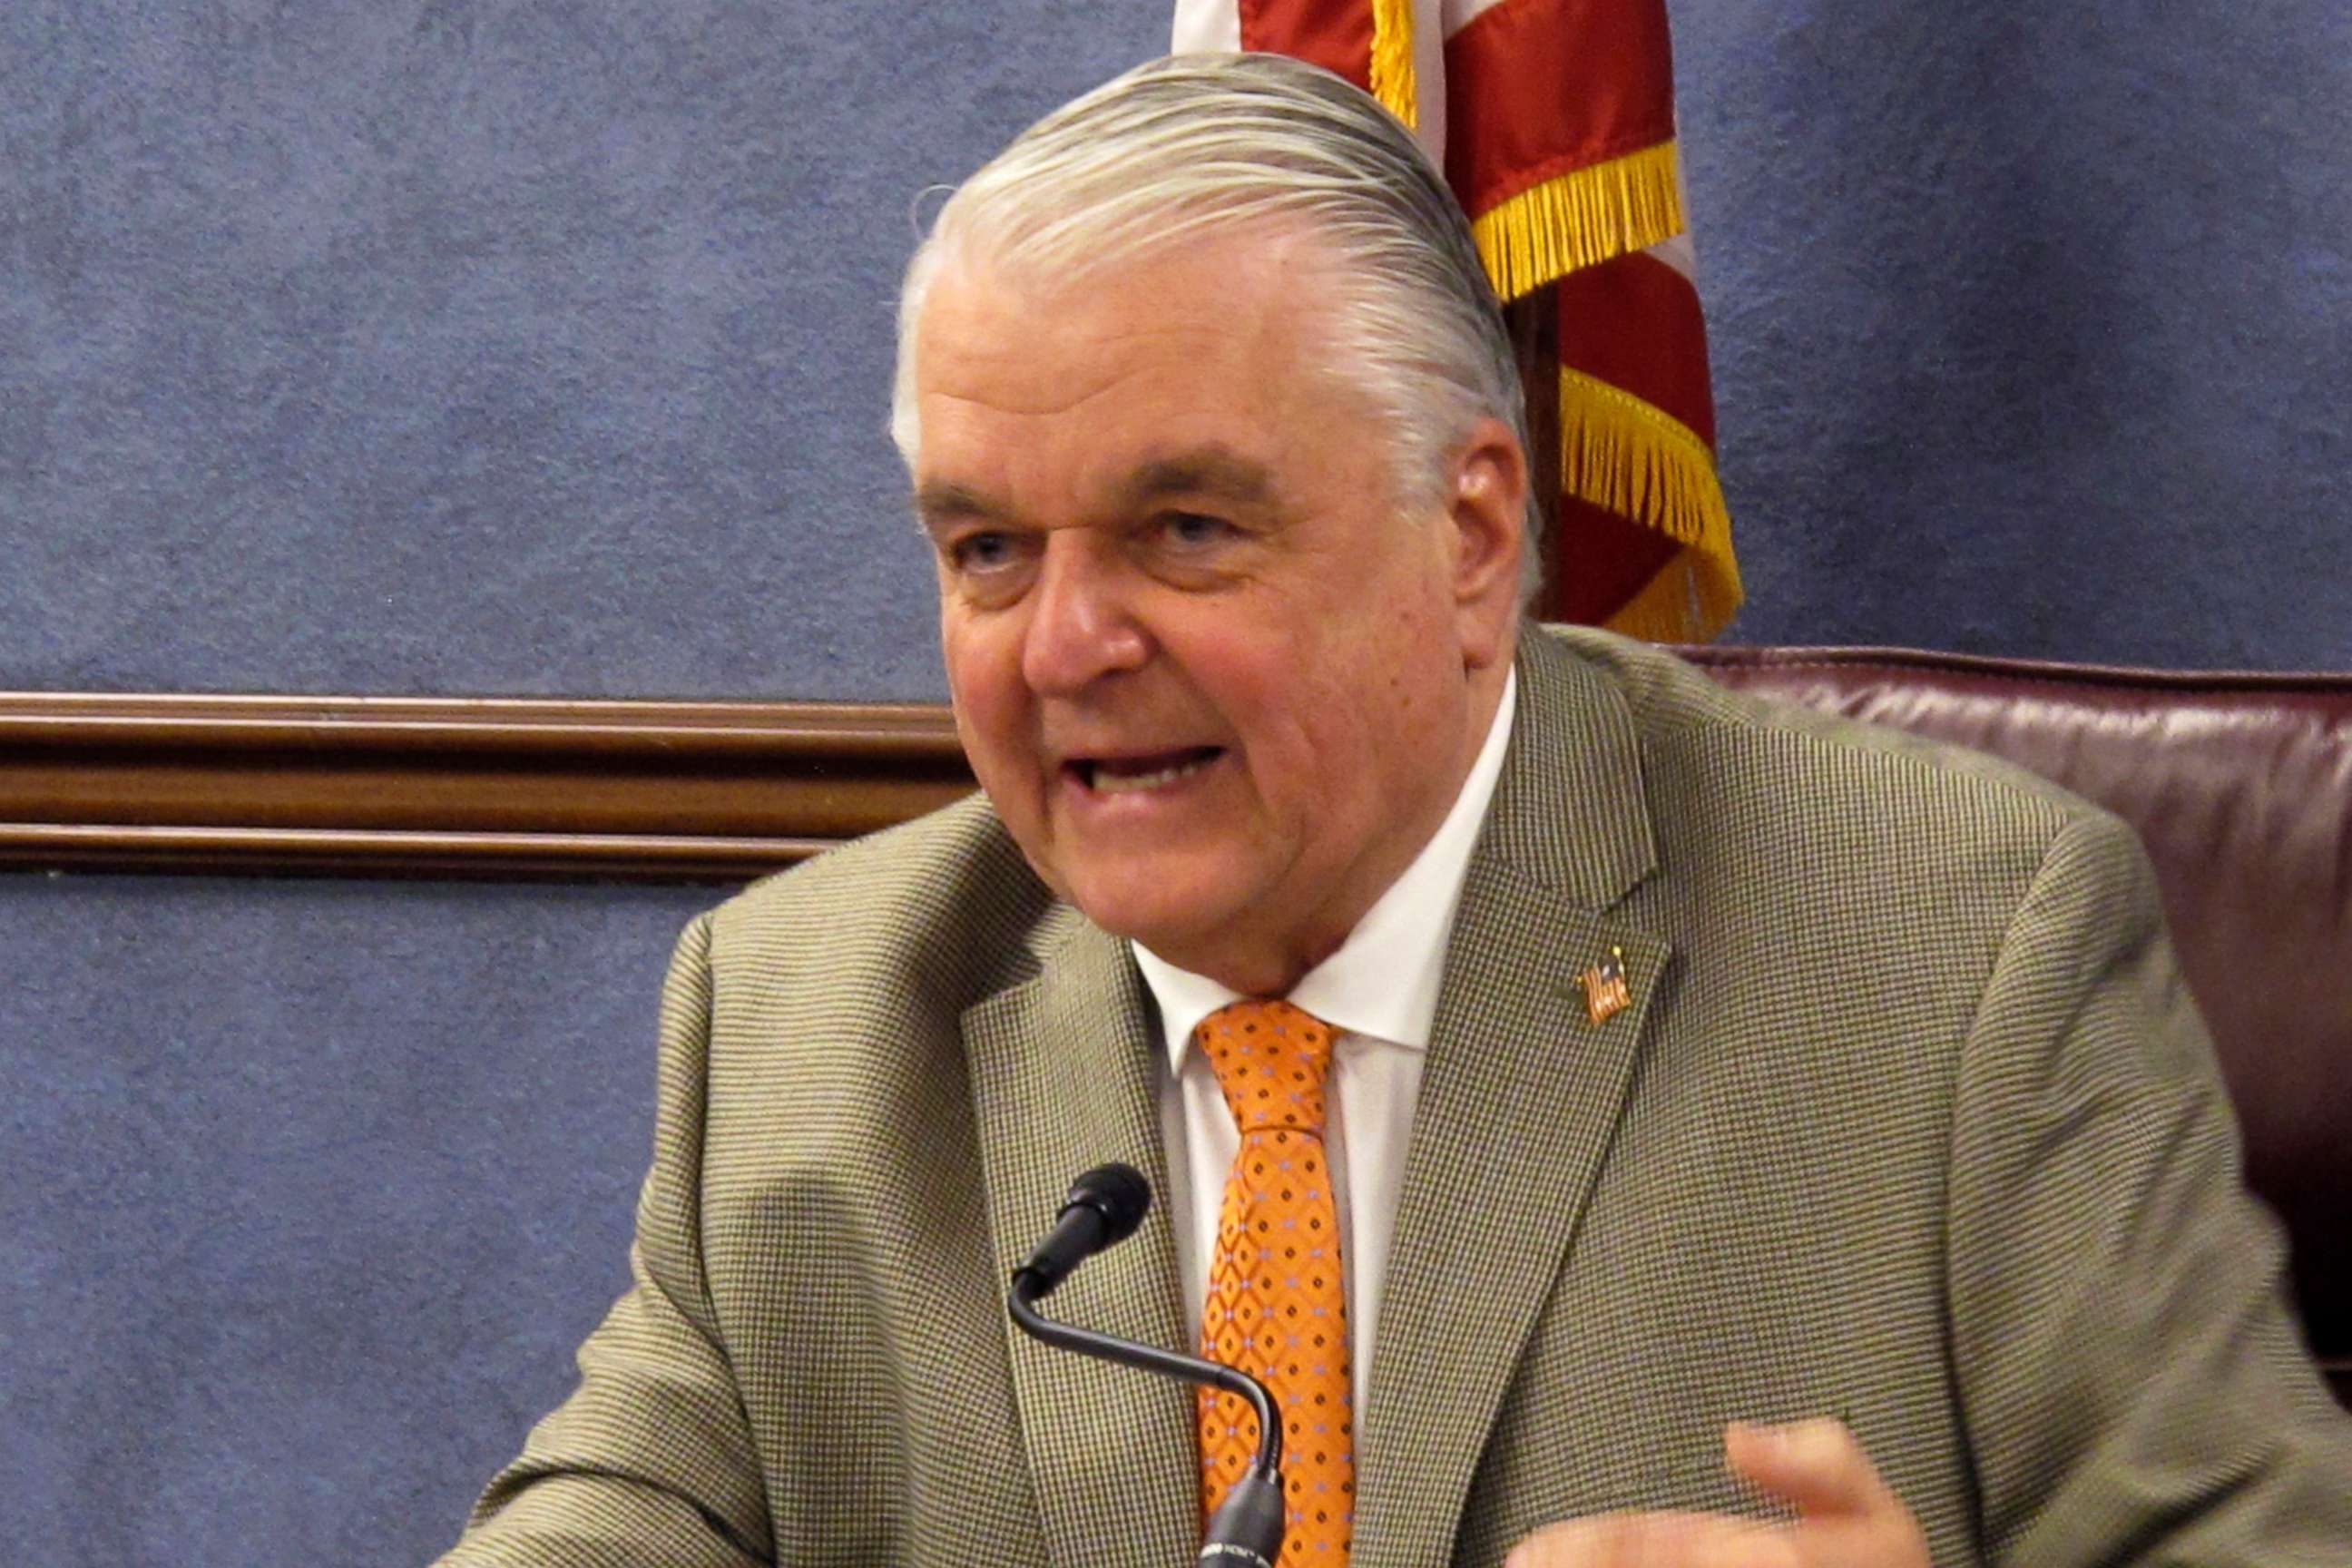 PHOTO: In this May 7, 2020, file photo, Nevada Gov. Steve Sisolak speaks during a news conference in Carson City, Nev.